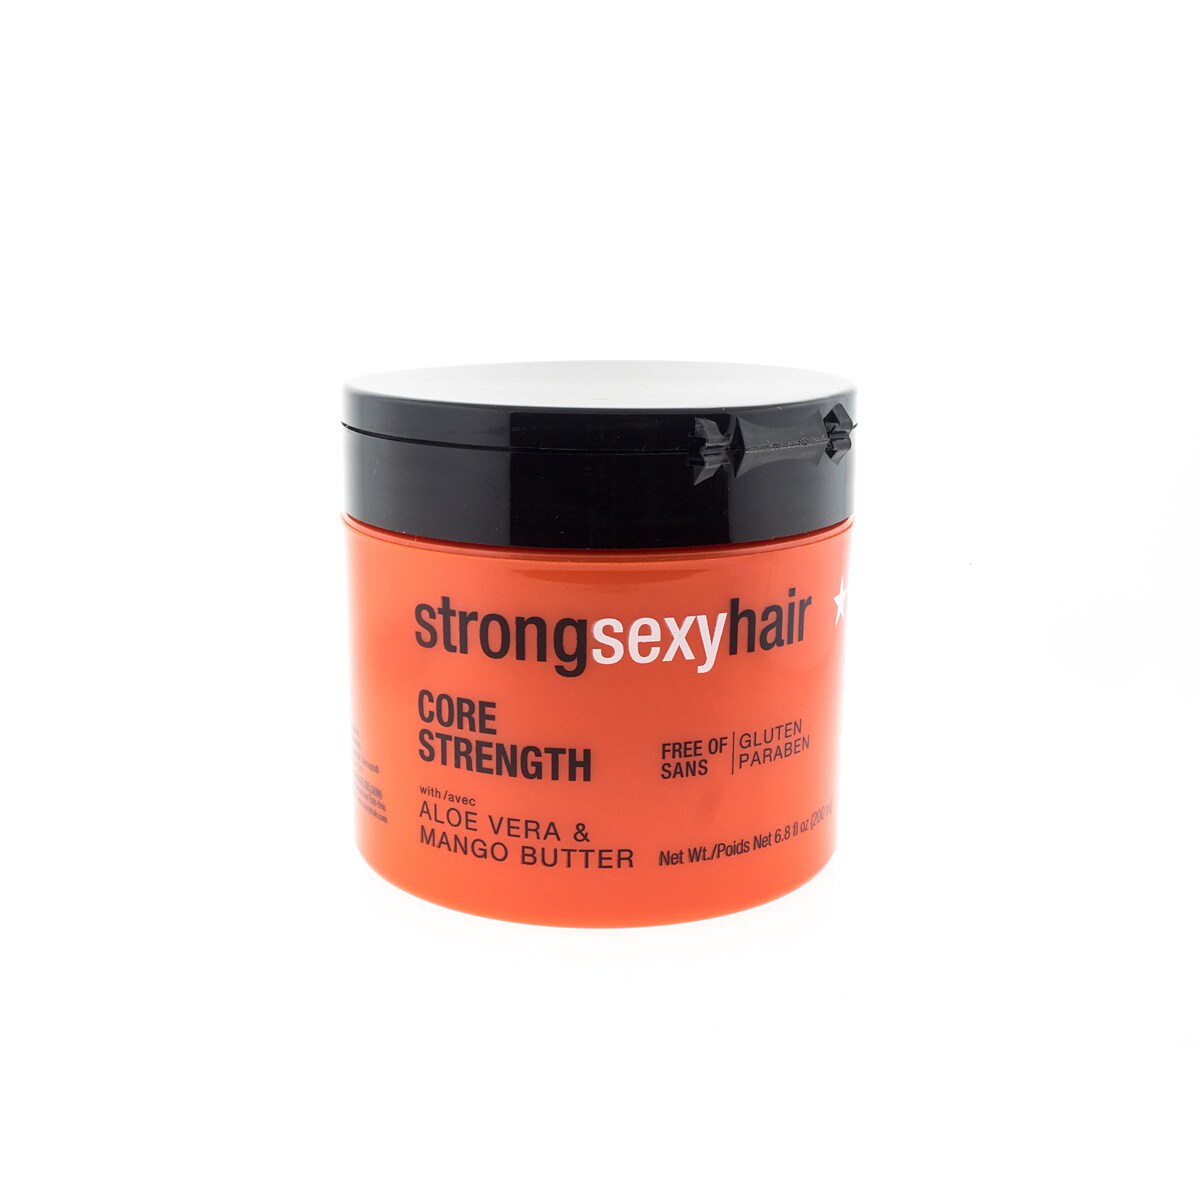 Strong Sexy Hair Core Strength Masque 6.8 oz - image 2 of 2